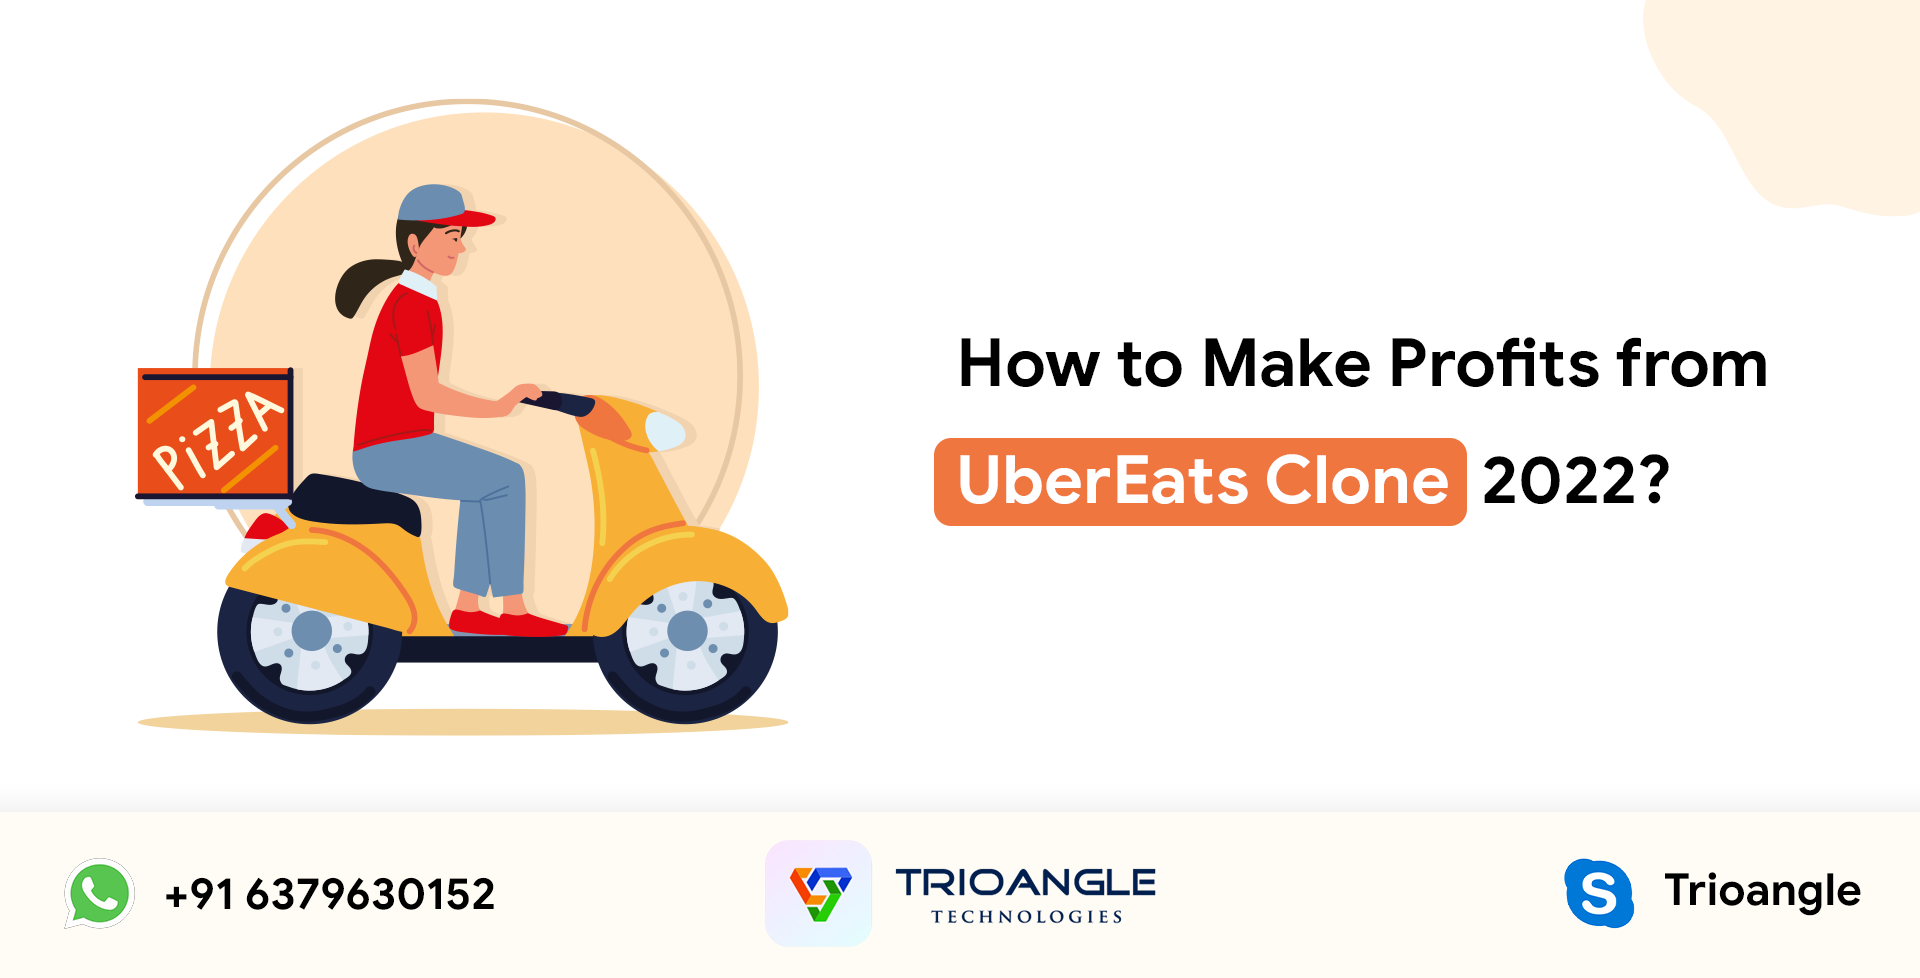 How to Make Profits from UberEats Clone 2022?